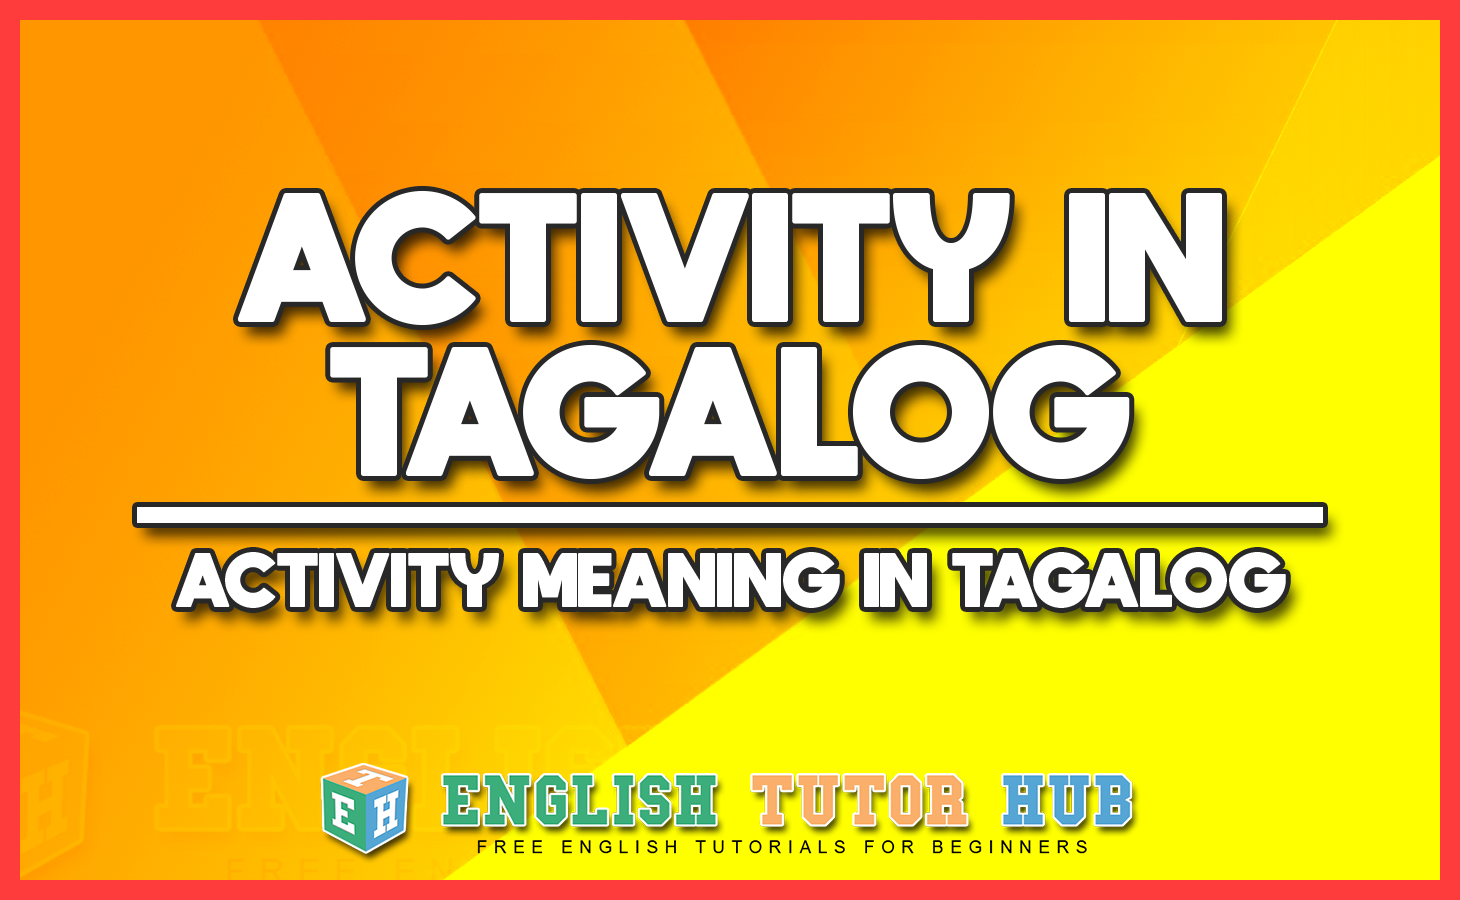 ACTIVITY IN TAGALOG - ACTIVITY MEANING IN TAGALOG